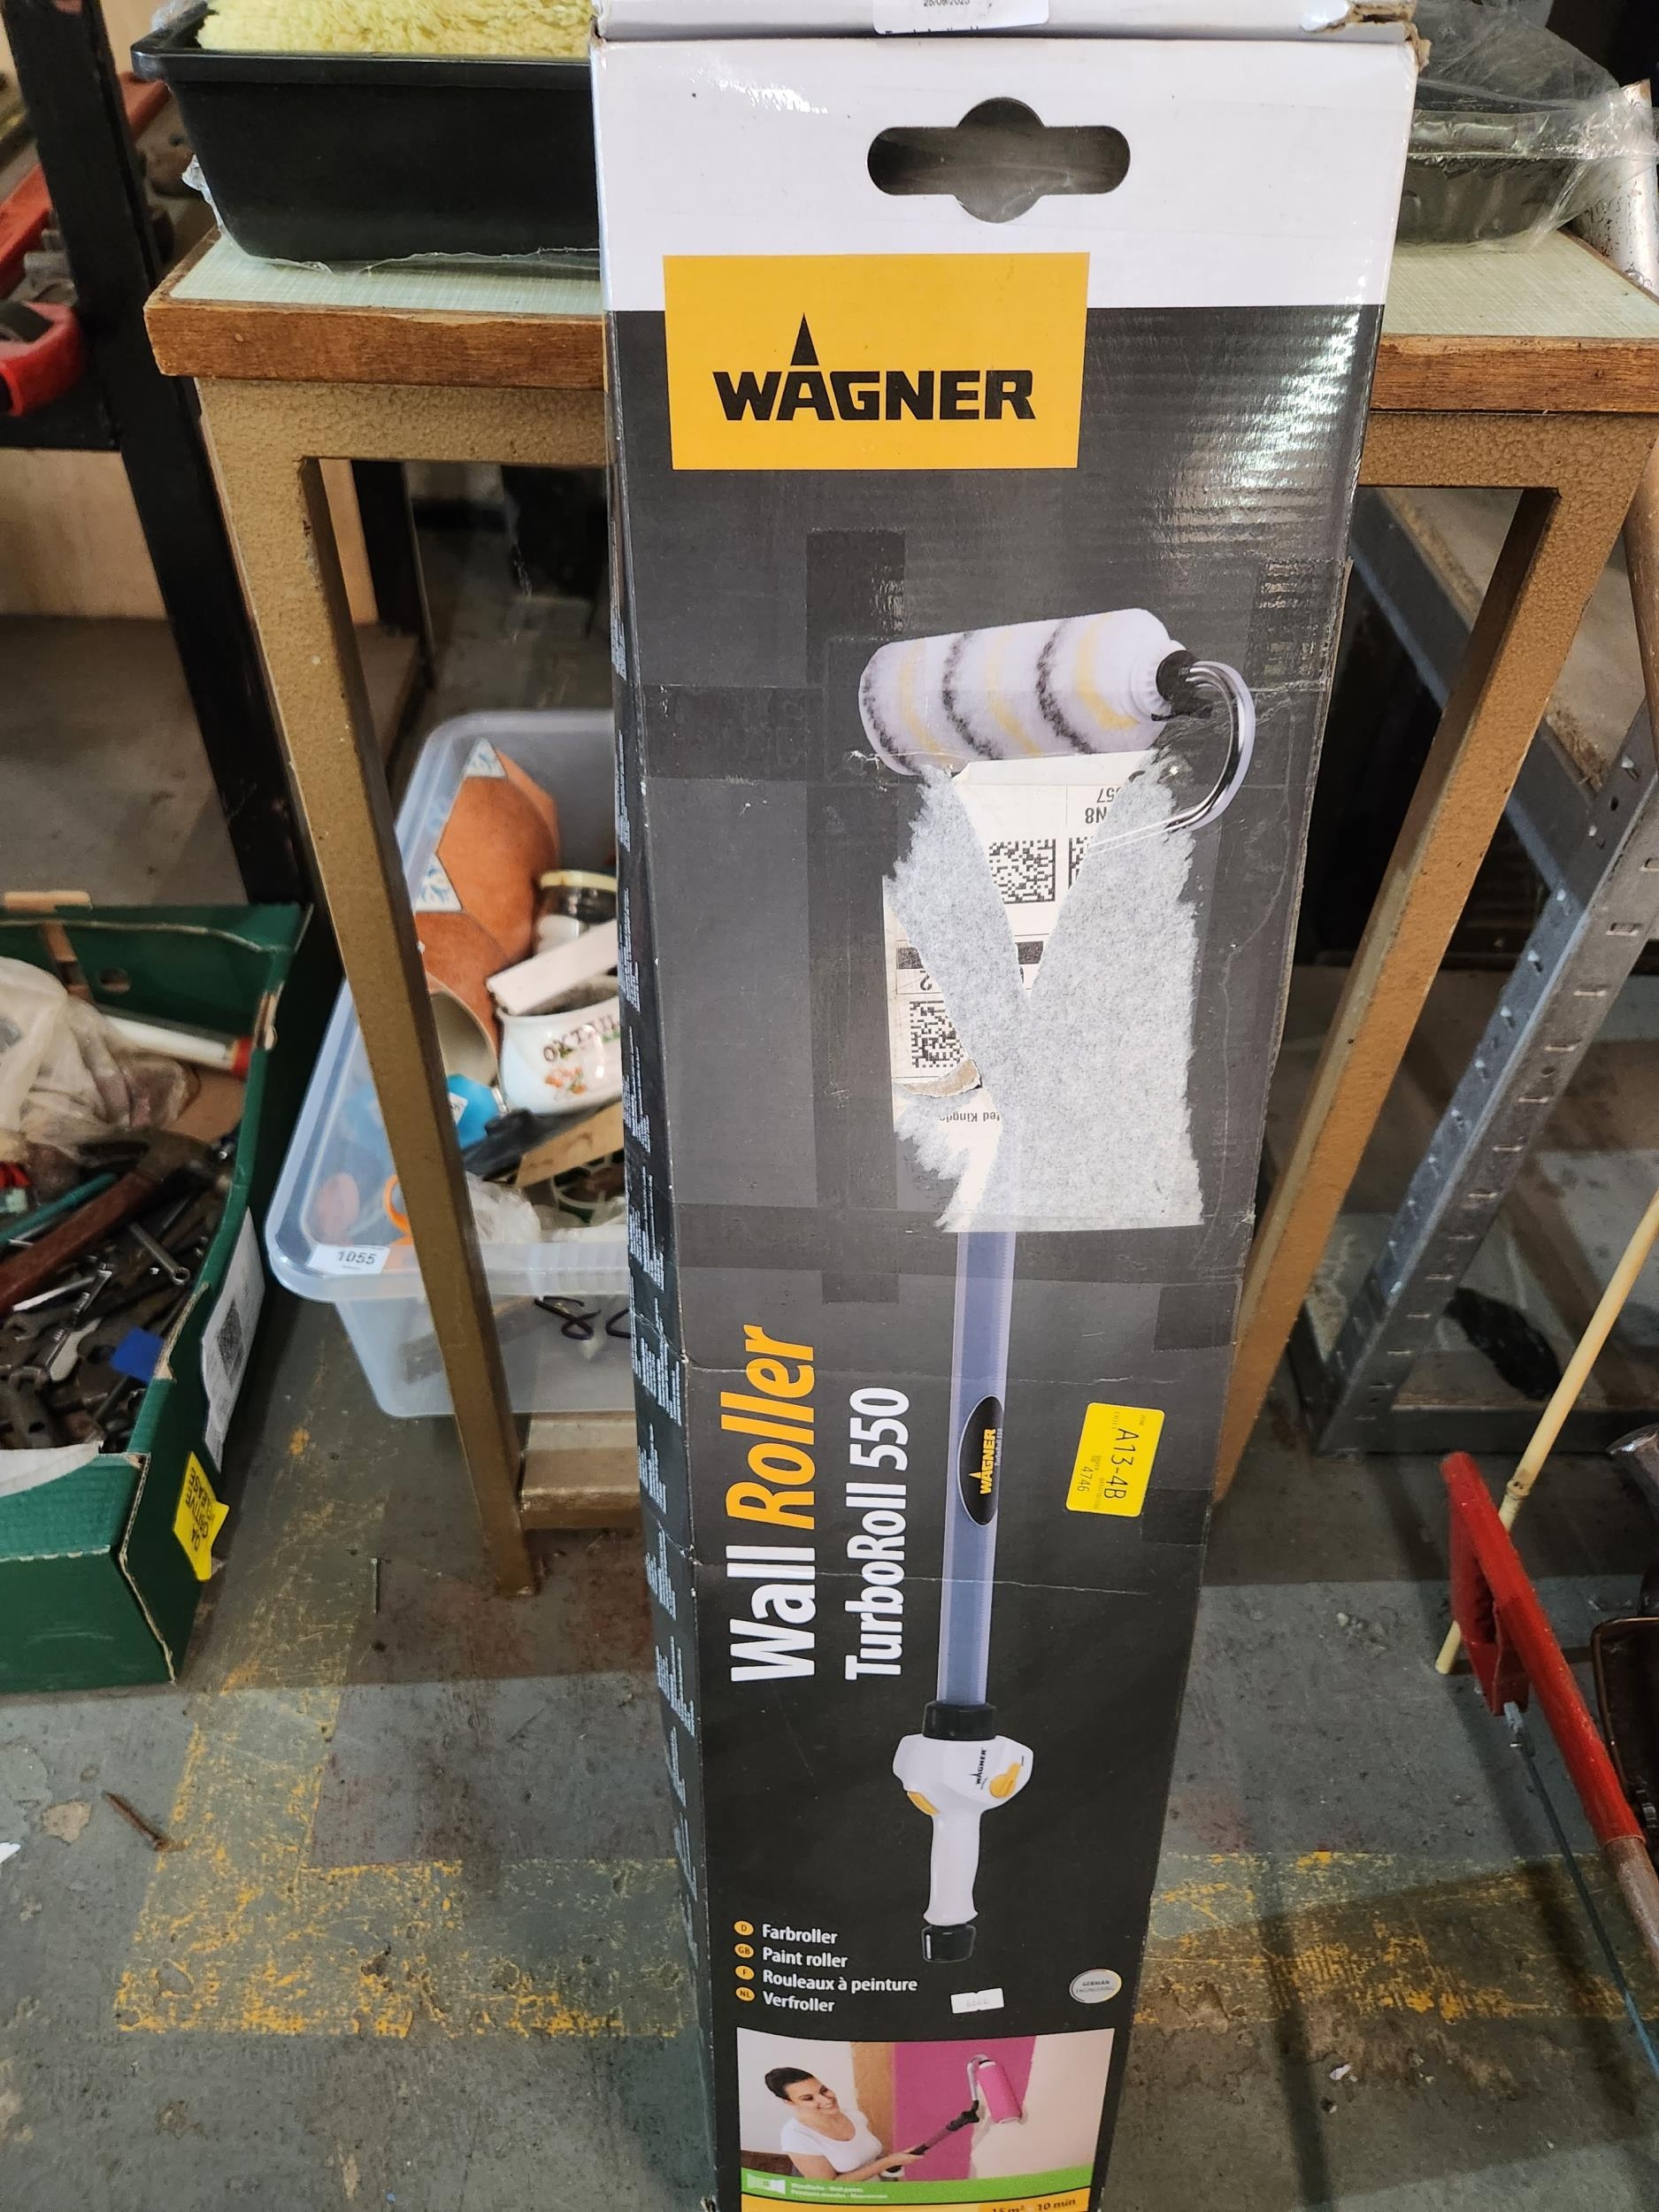 WAGNER BRAND NEW 550 TURBOROLL WALL ROLLER IN